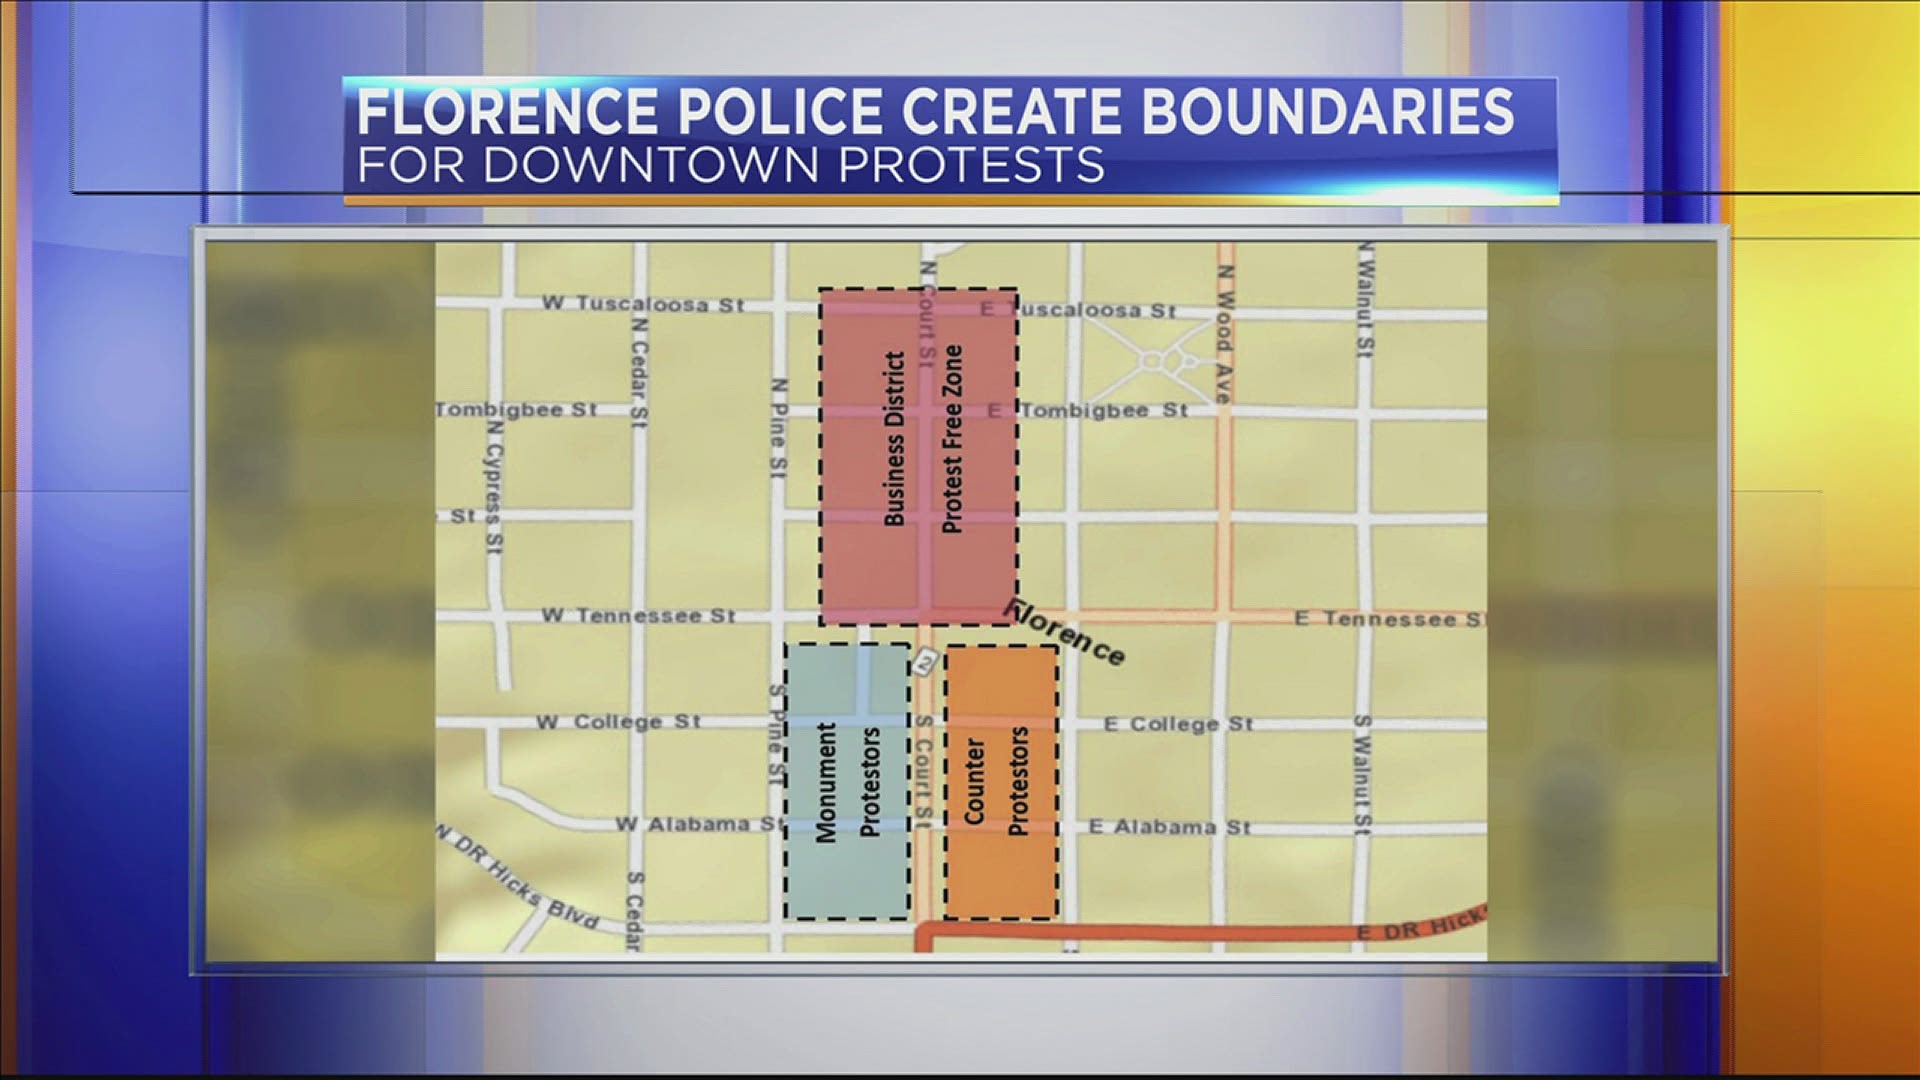 Florence police created "zones" for downtown protestors to reduce the risk of clashes between groups.